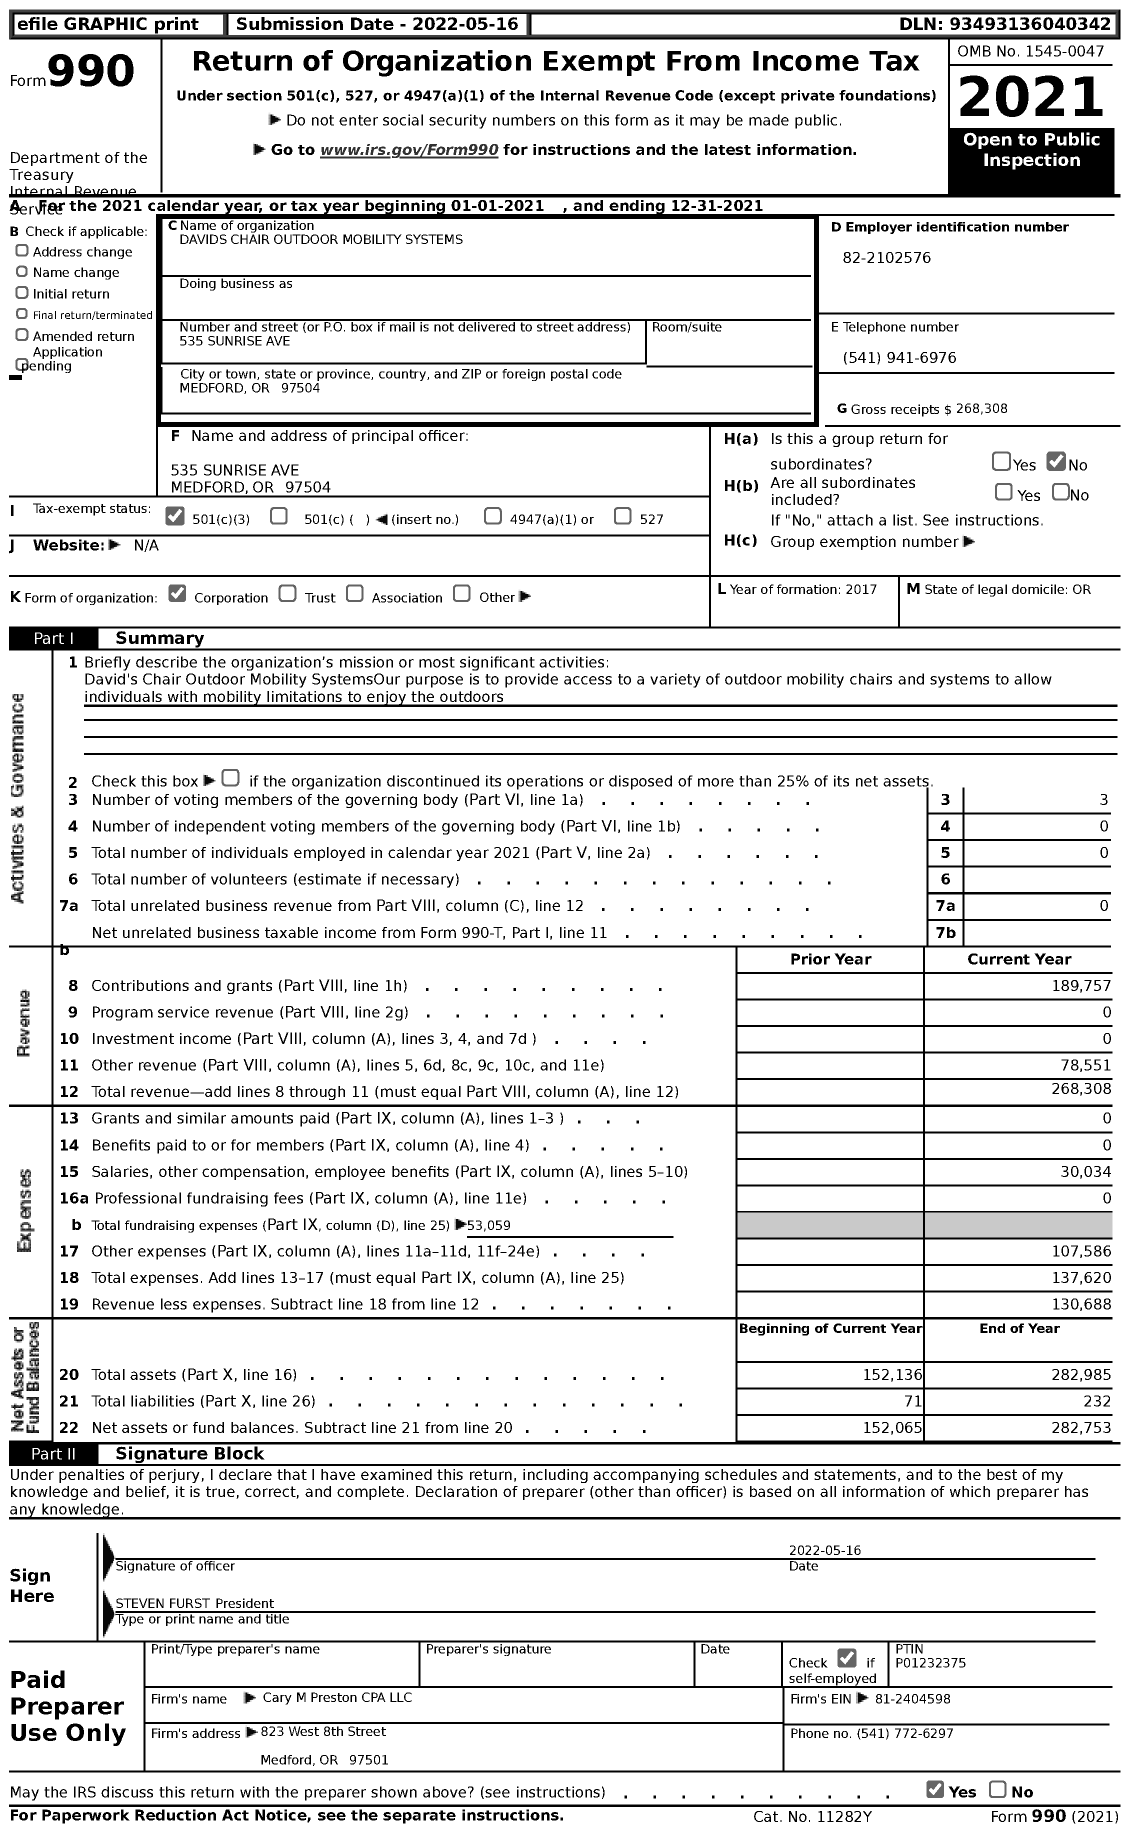 Image of first page of 2021 Form 990 for Davids Chair Outdoor Mobility Systems